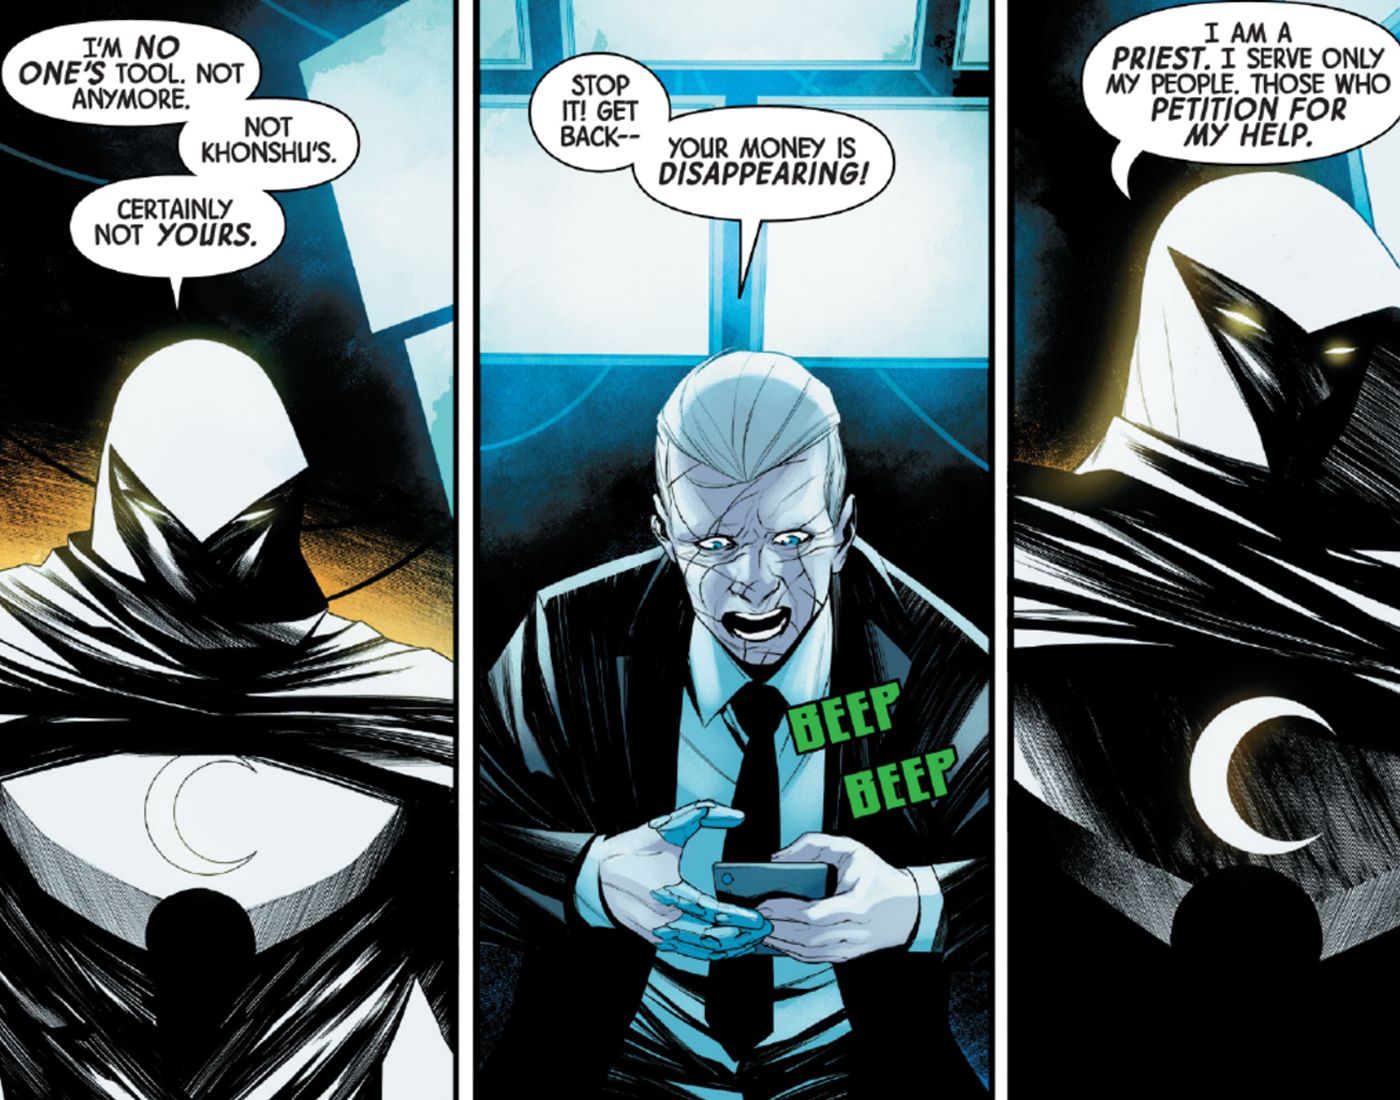 Moon Knight Money Disappears